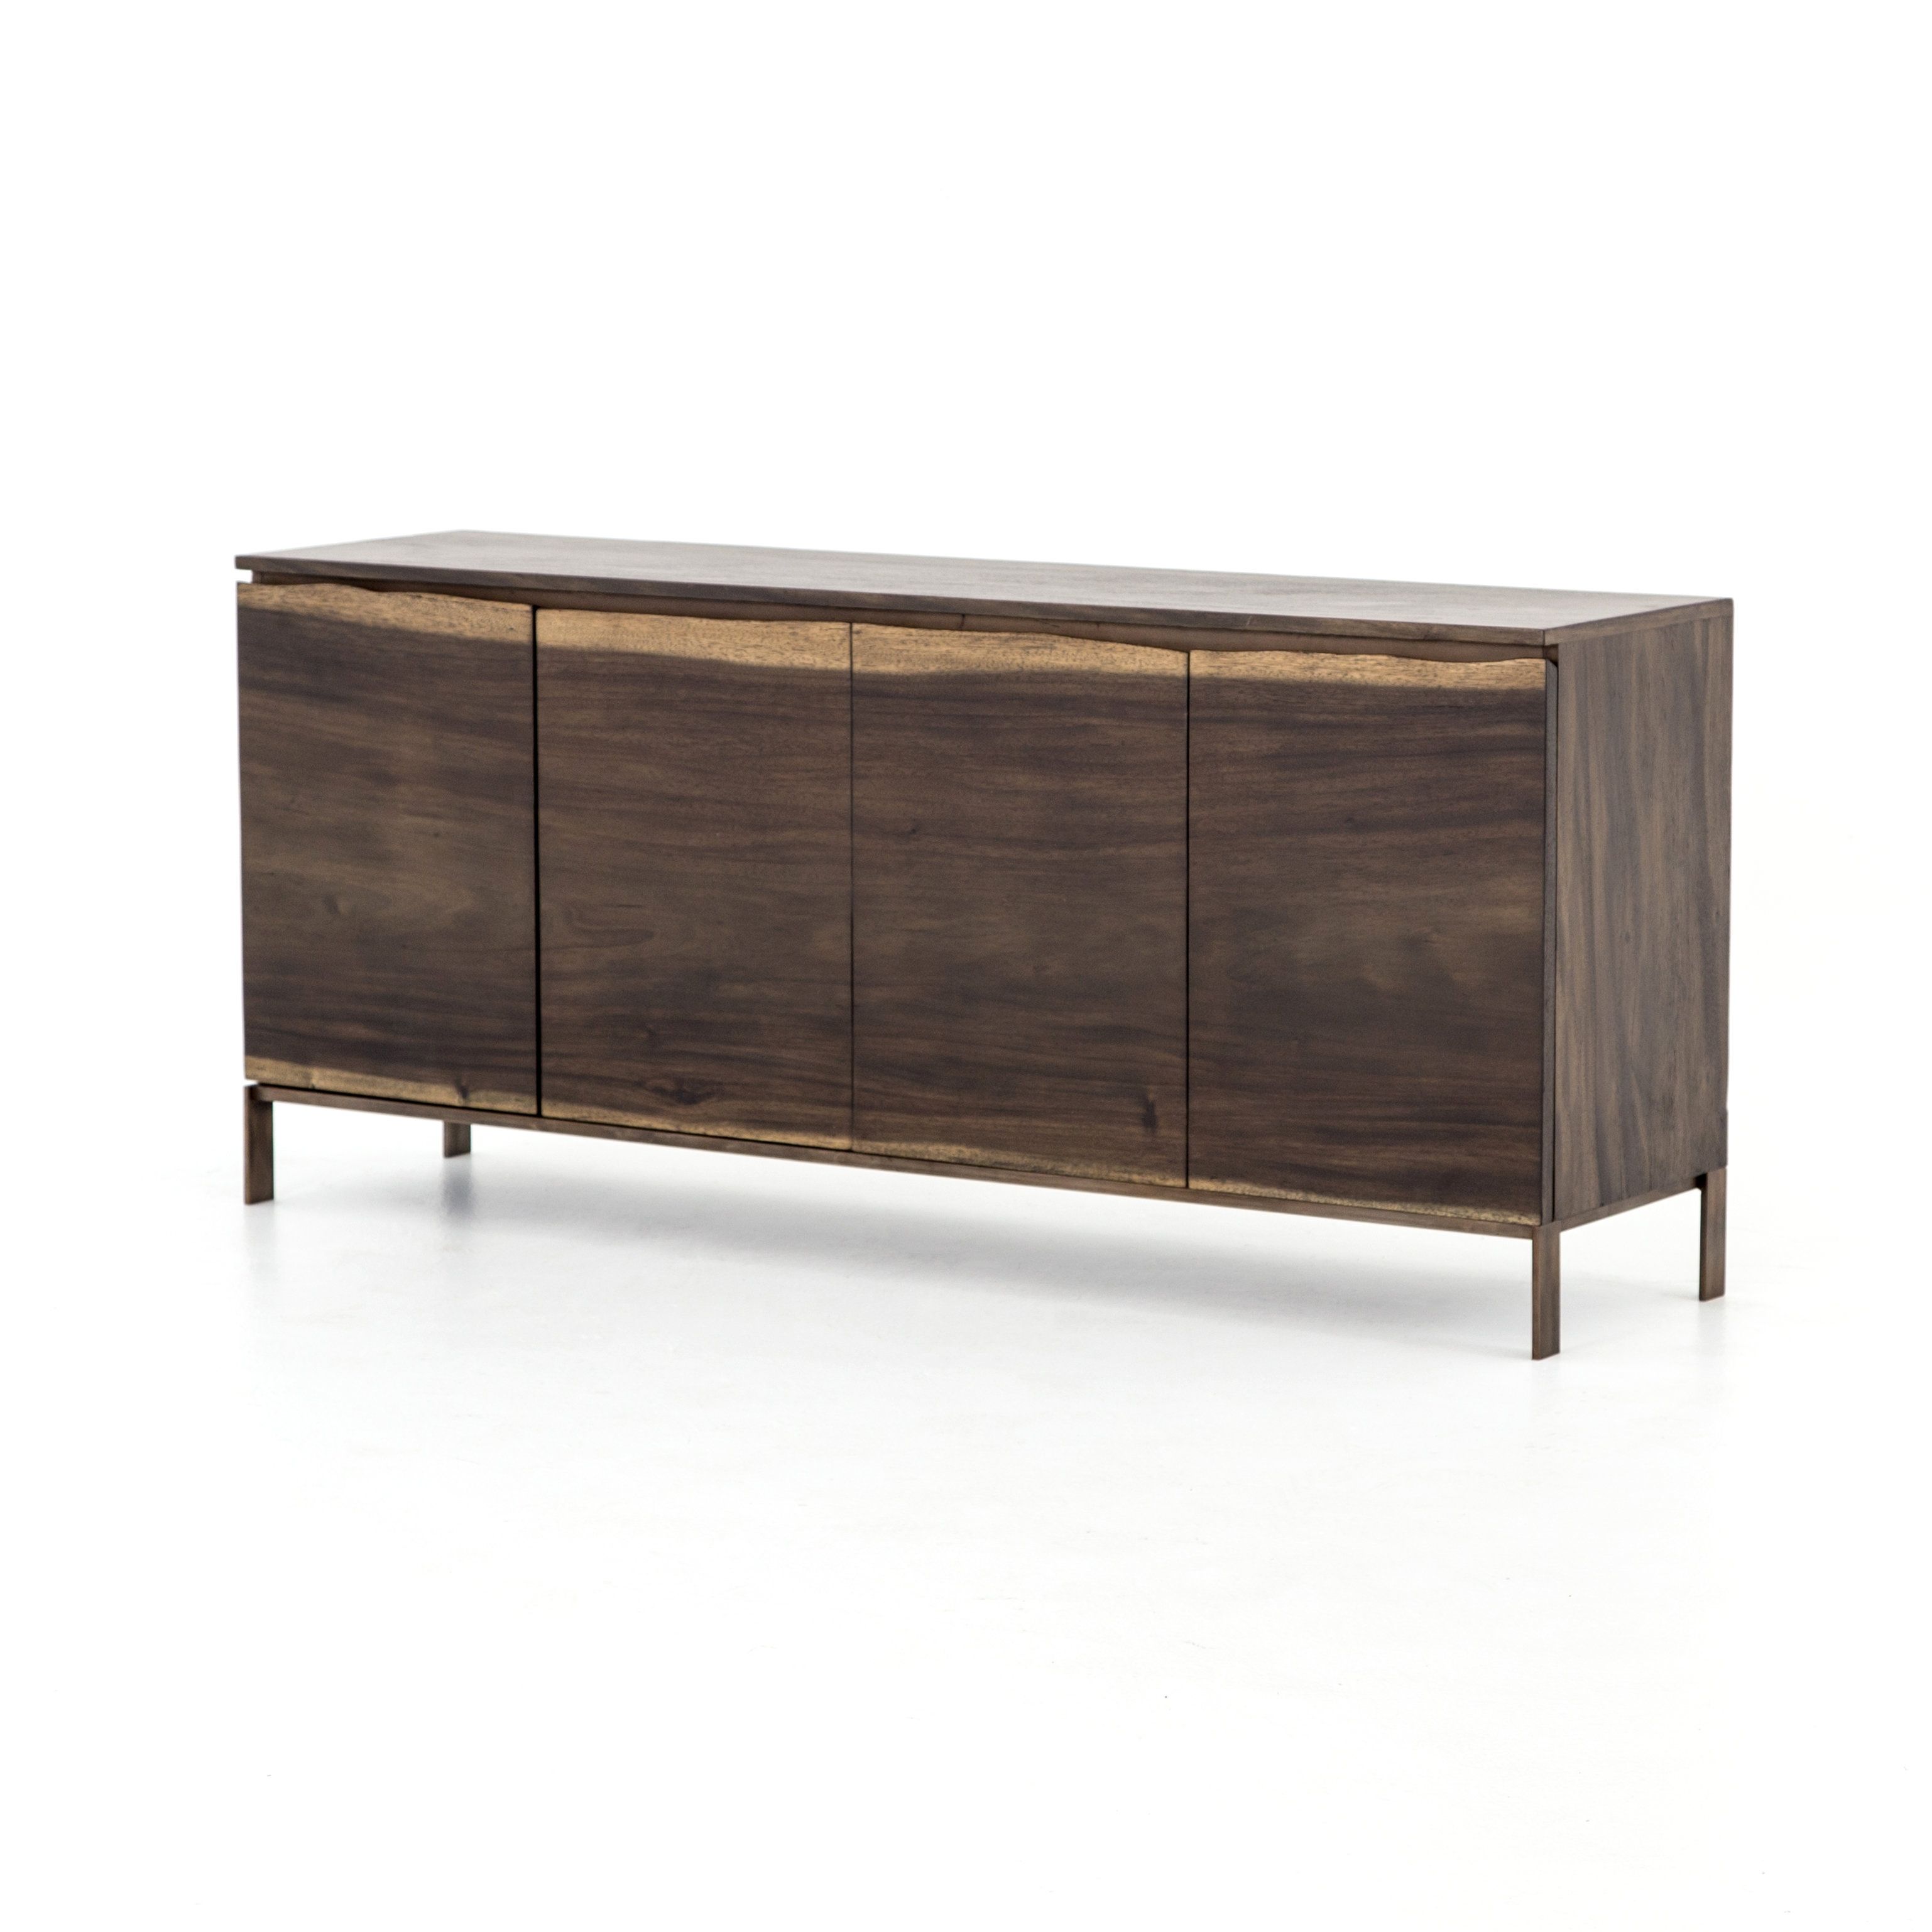 Foundry Select Attica Live Edge Sideboard | Wayfair Within Solar Refinement Sideboards (View 8 of 30)